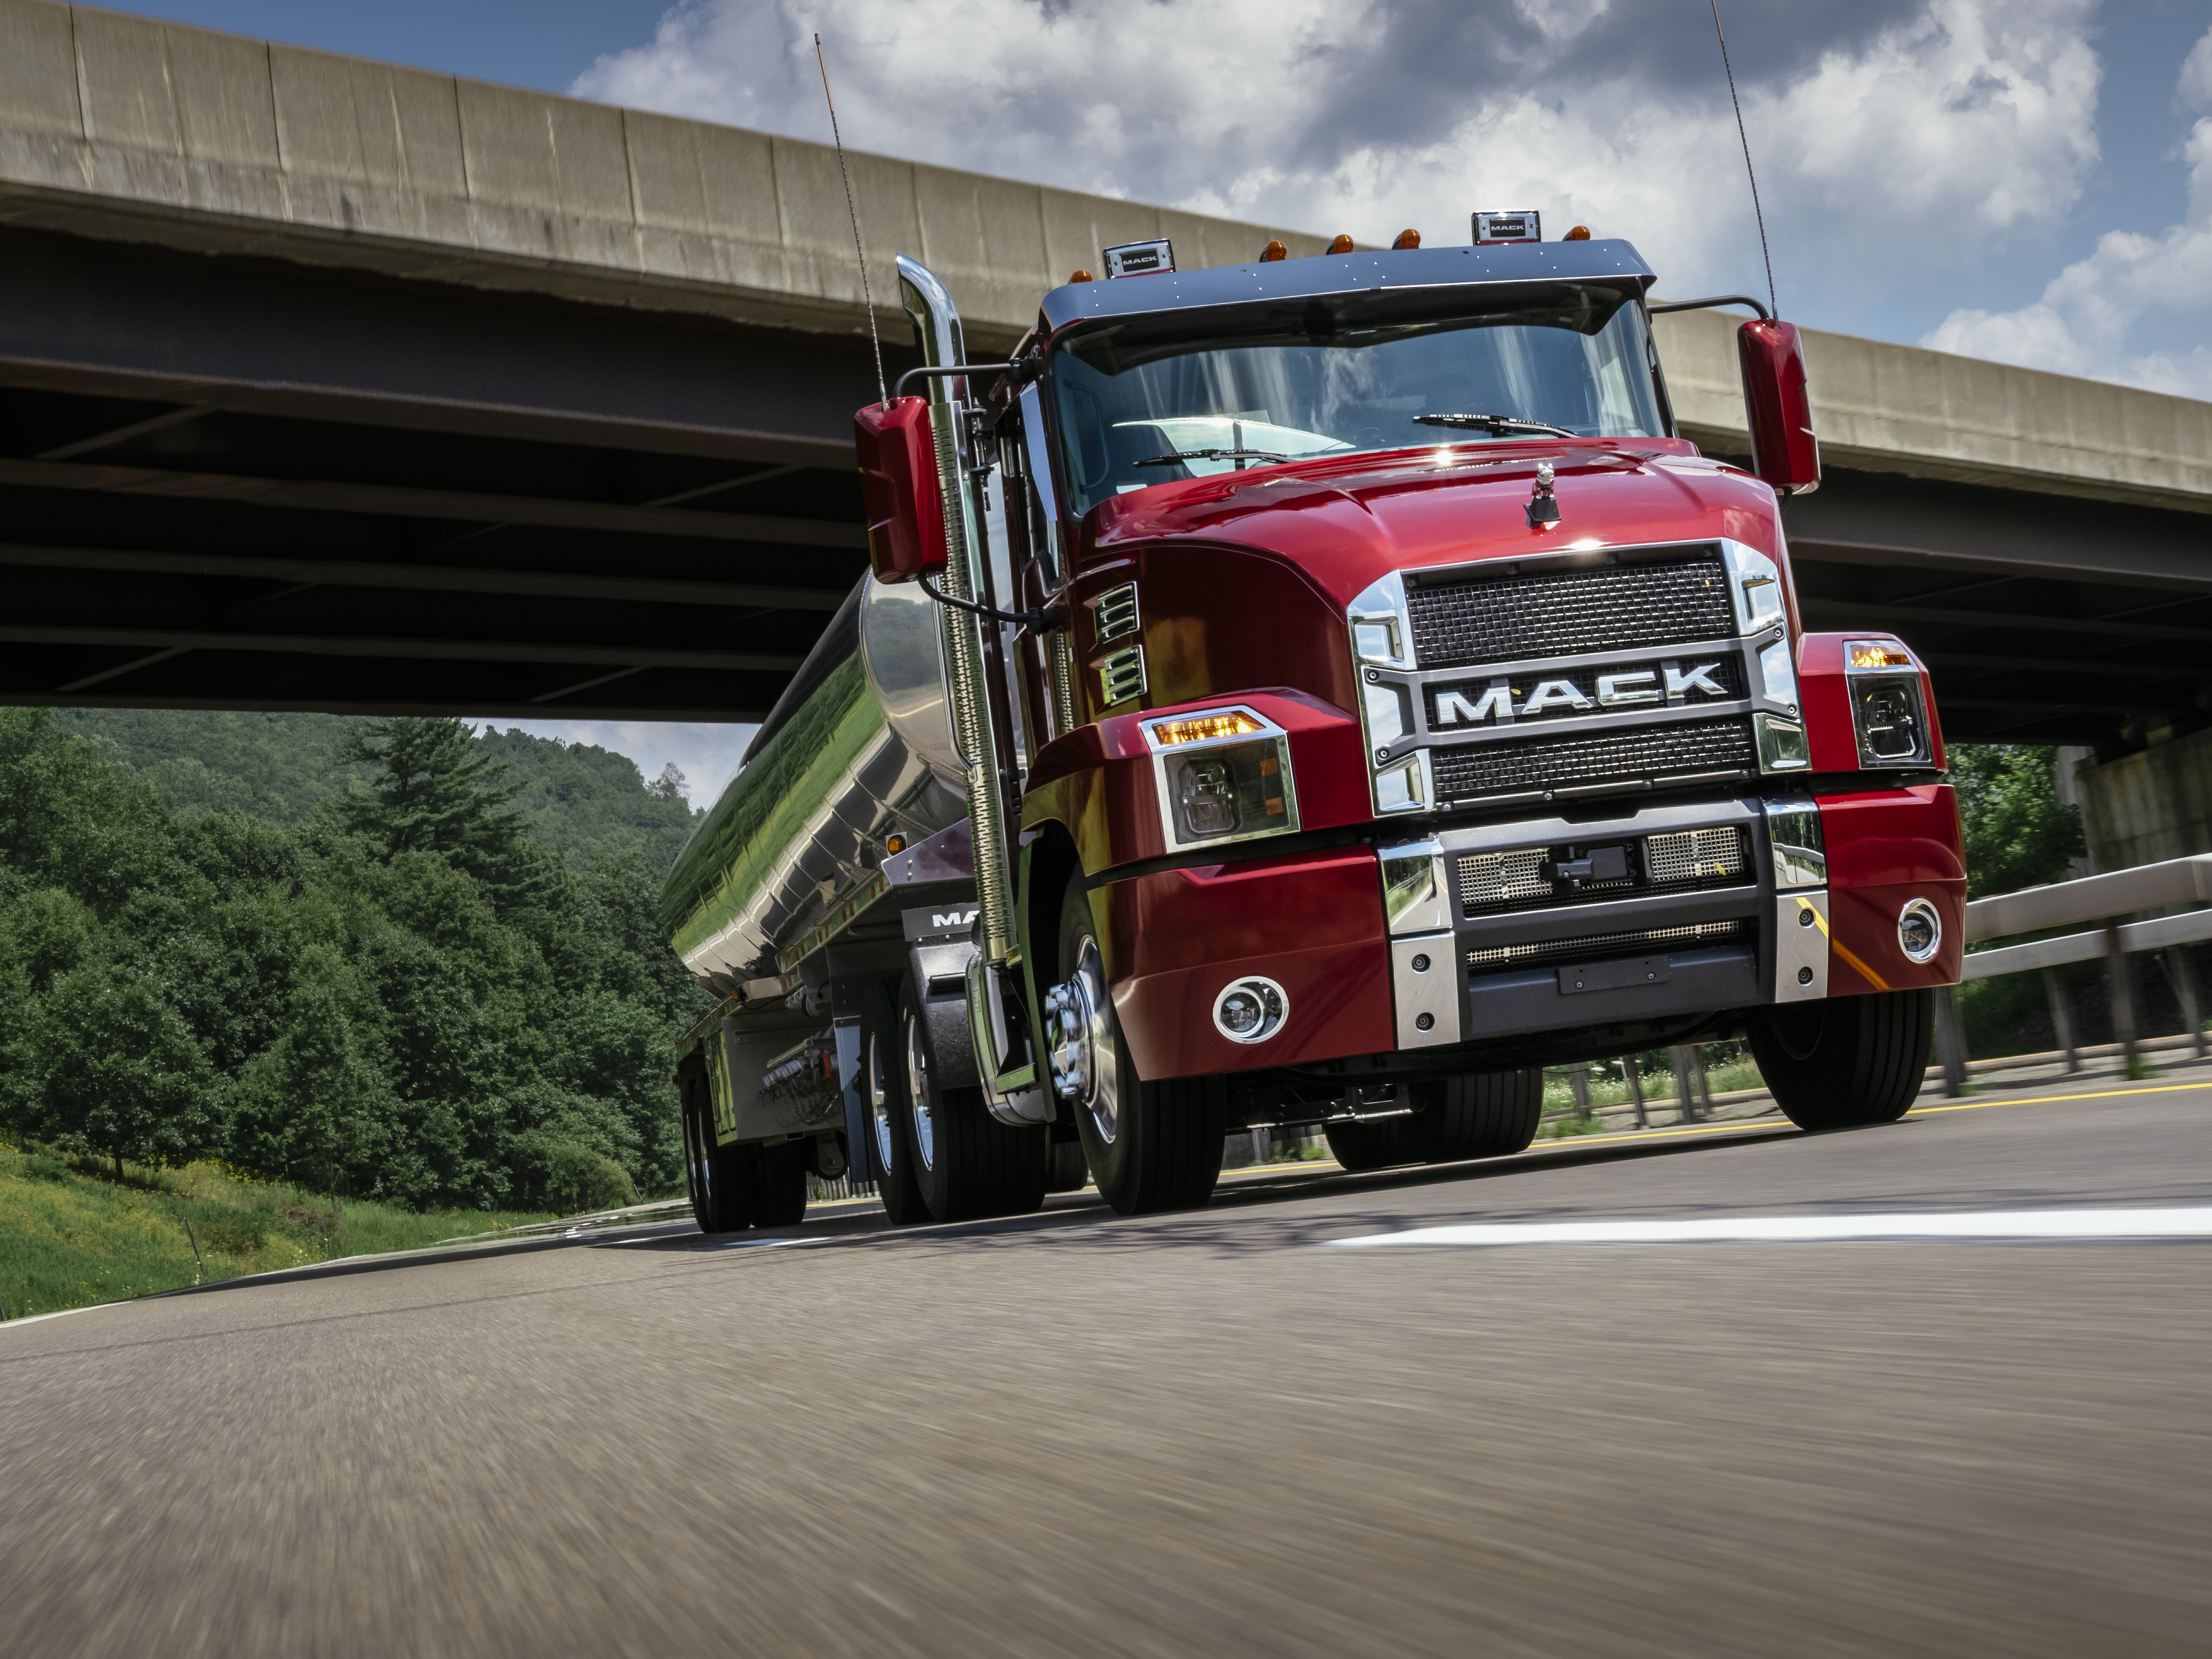 New truck models and technology from Mack Trucks are emerging. 